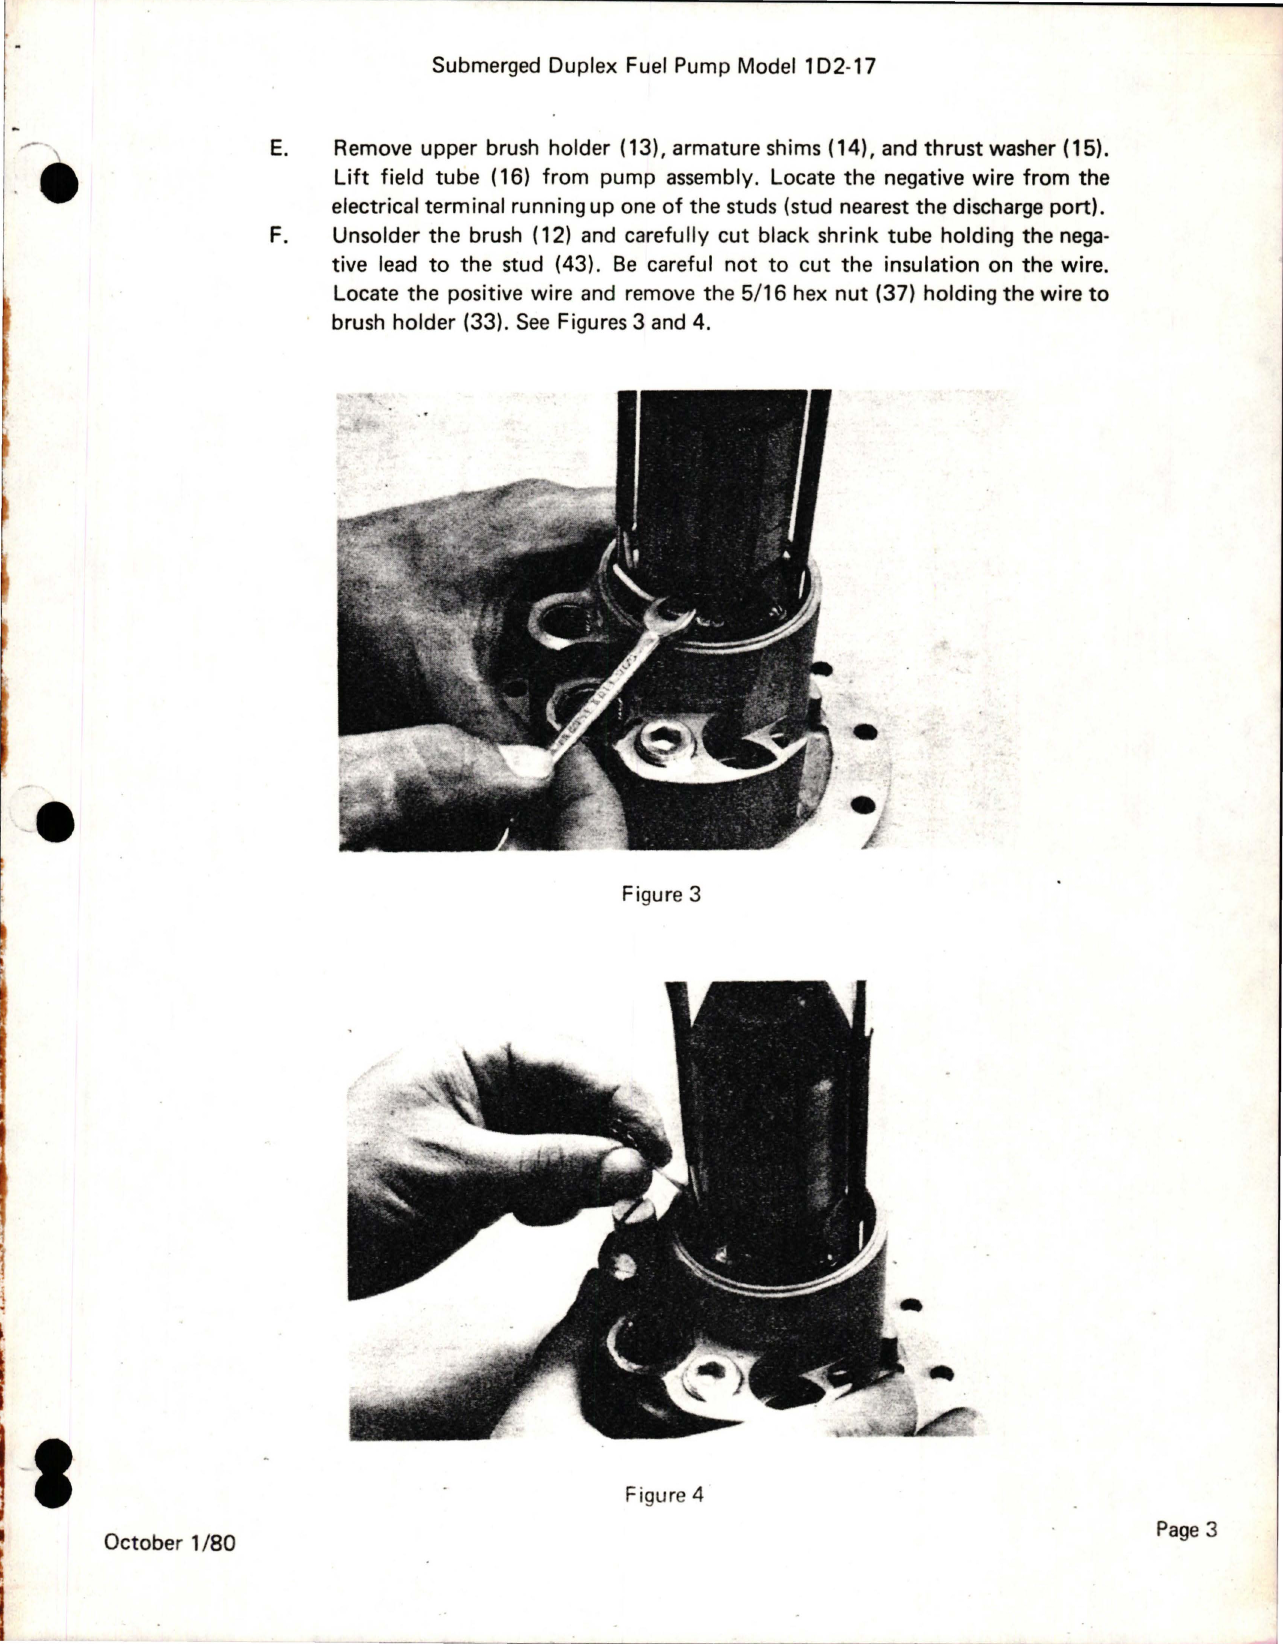 Sample page 5 from AirCorps Library document: Overhaul Instructions with Parts Catalog for Submerged Duplex Fuel Pump - Model 1D2-17 (Parker